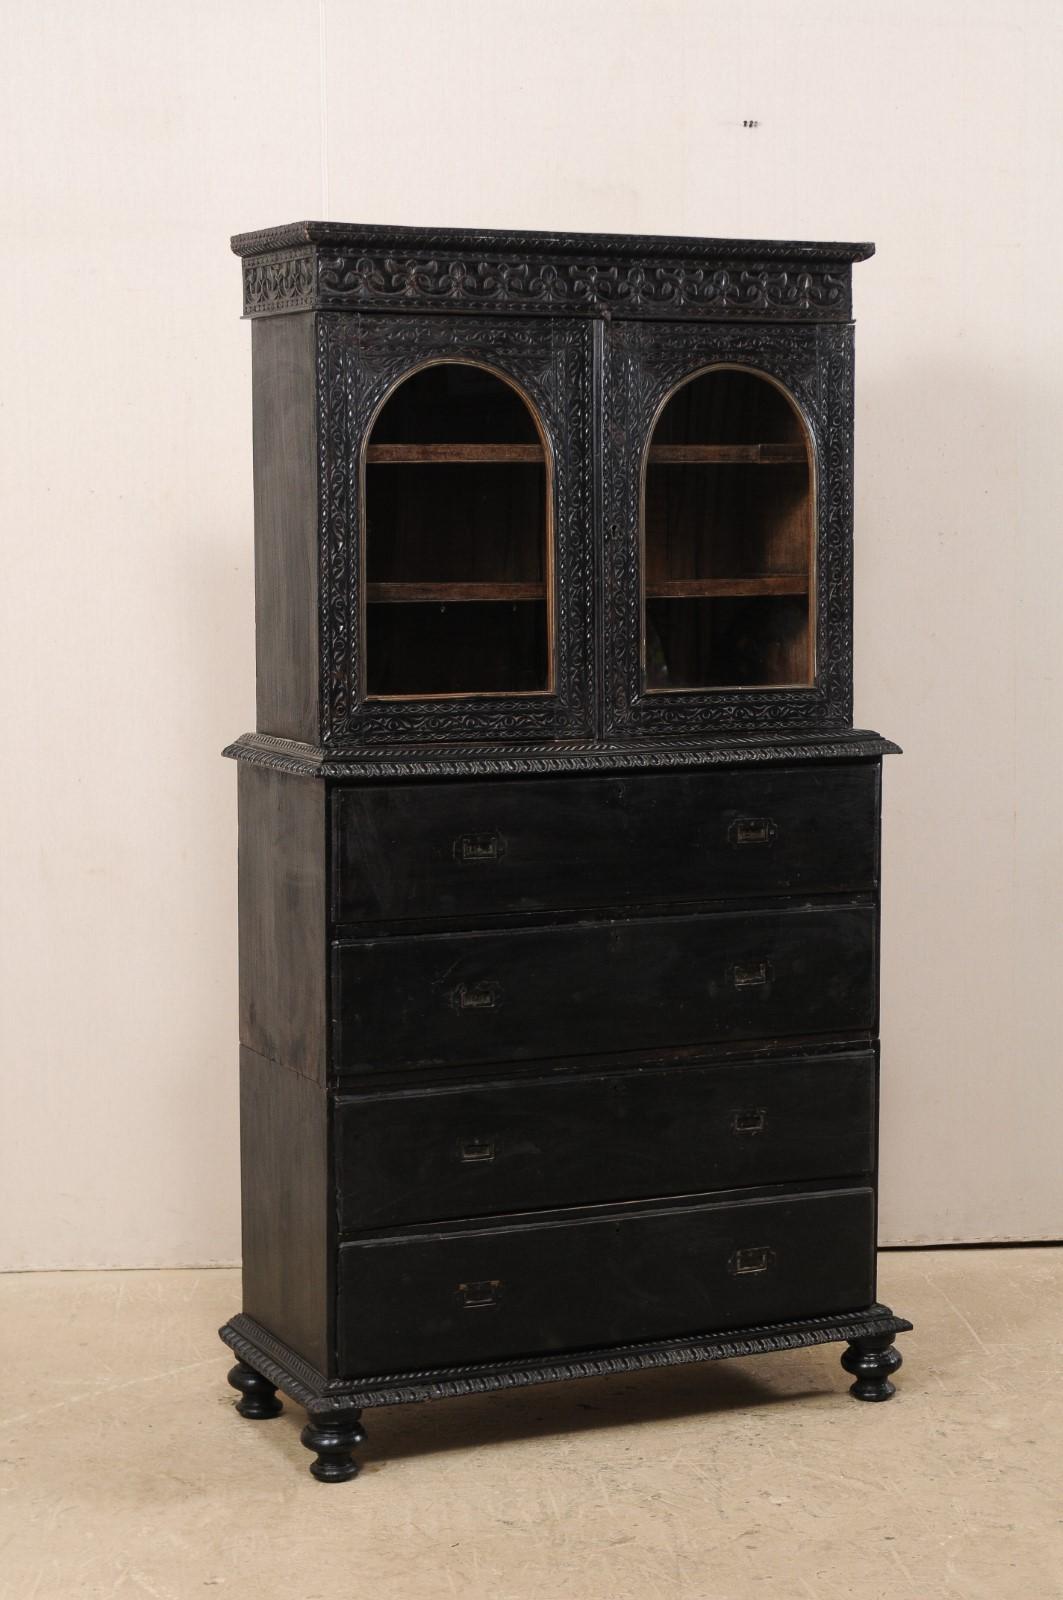 A tall British Colonial carved-wood secretary with display top from the turn of the 19th and 20th century. This fabulous antique piece from India is as beautiful as it is functional. The upper case is comprised of a pair of arched glass panel doors,